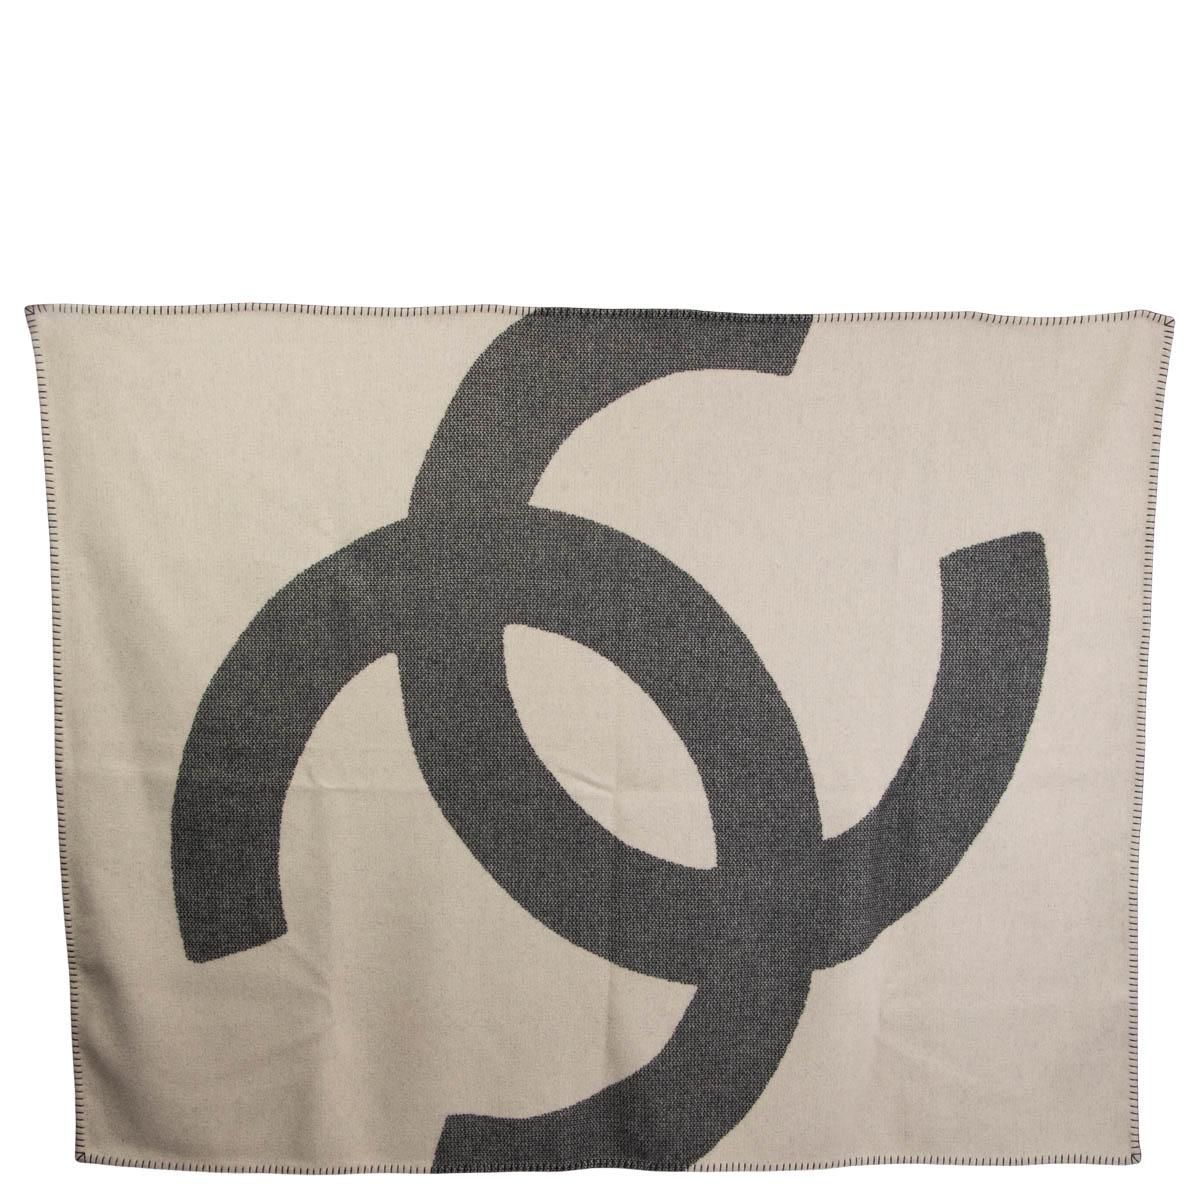 100% authentic Chanel CC throw blanket and matching pillow in soft black and off-white wool (90%) and cashmere (10%). Has been used and is in excellent condition. 

Measurements
Length	180cm (70.2in)
Width	140cm (54.6in)

All our listings include